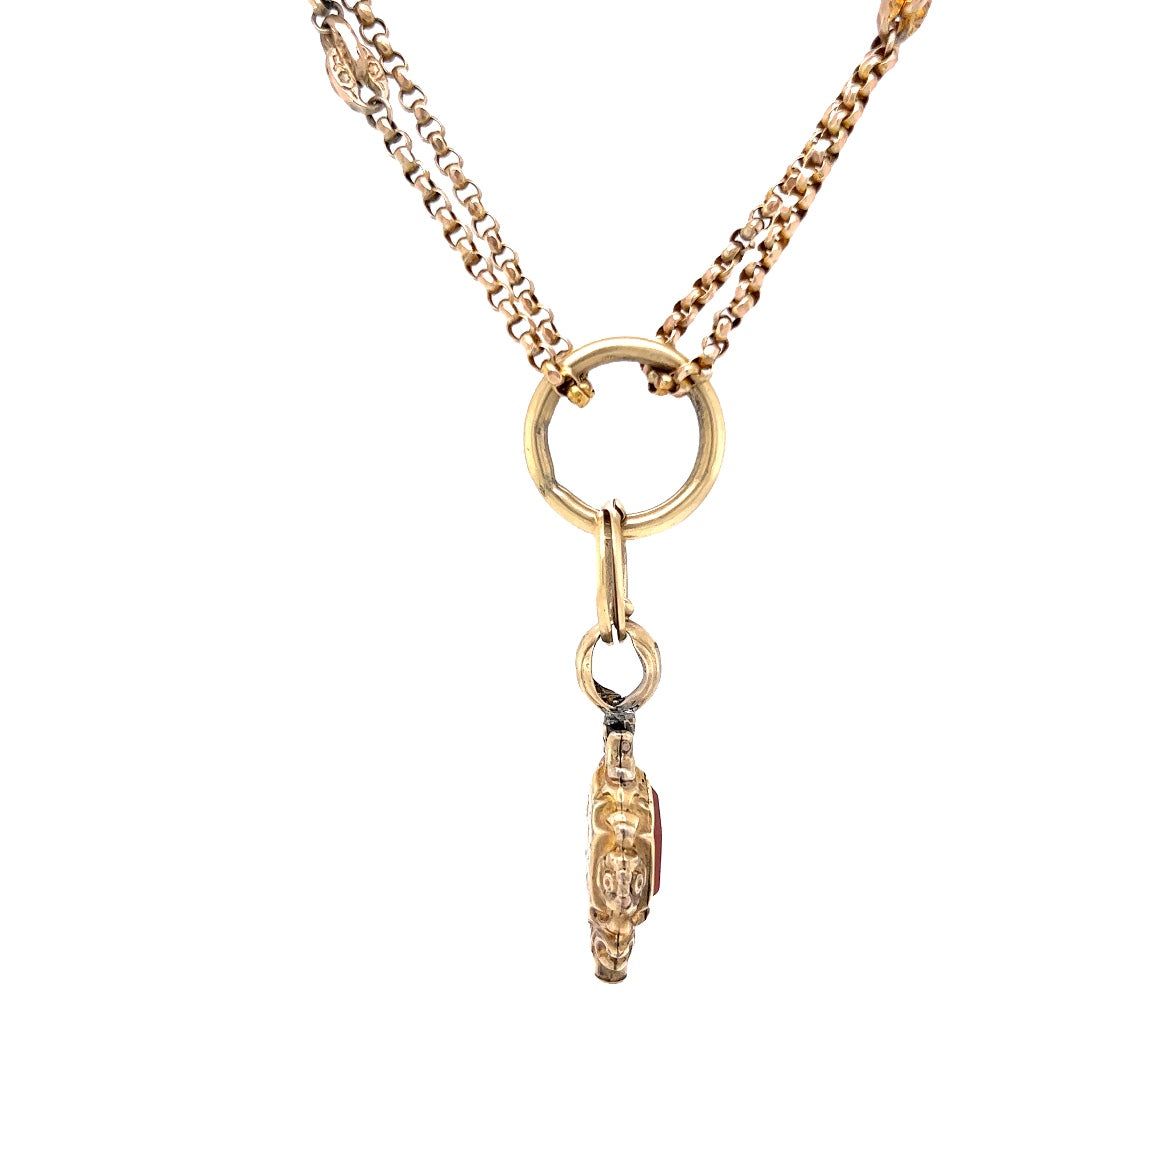 Antique Chain Victorian in 10k Yellow Gold